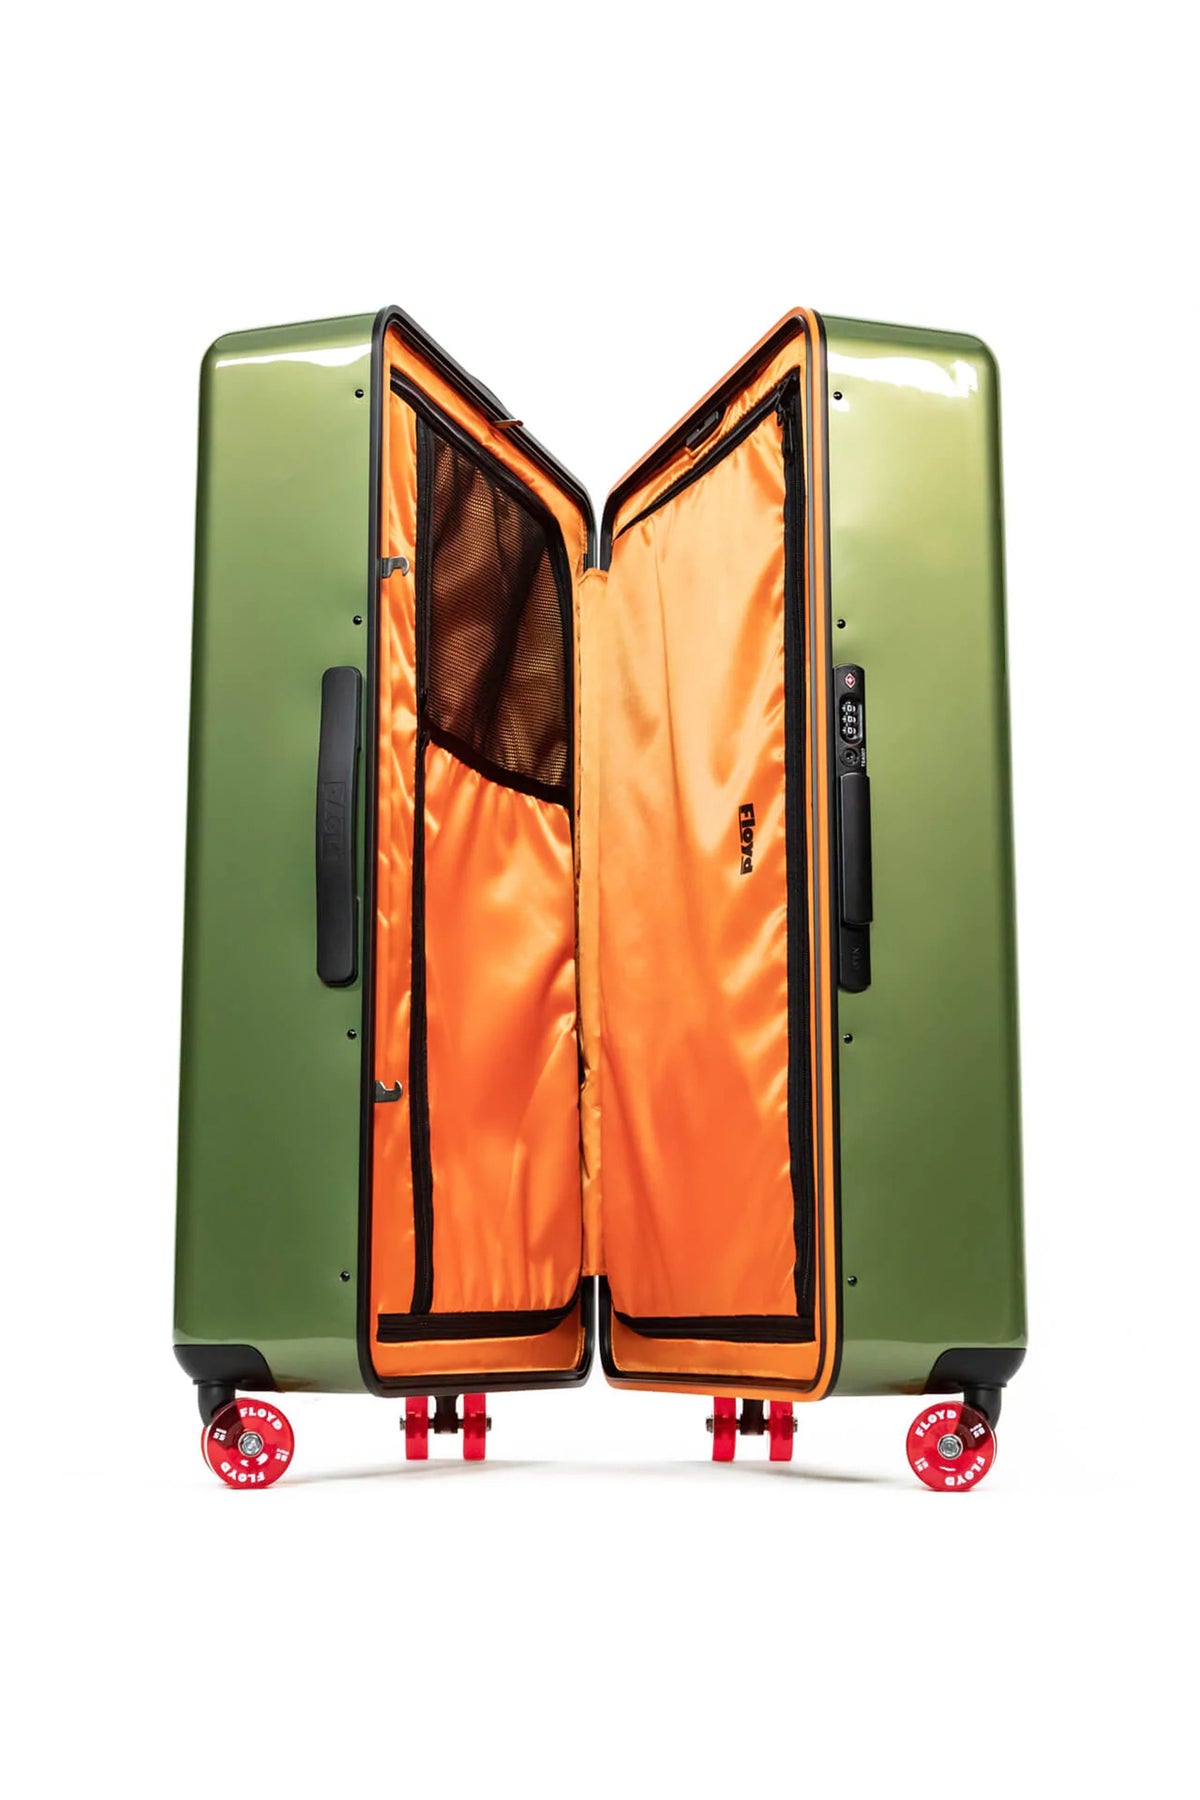 Ensure you are road trip ready with this luggage